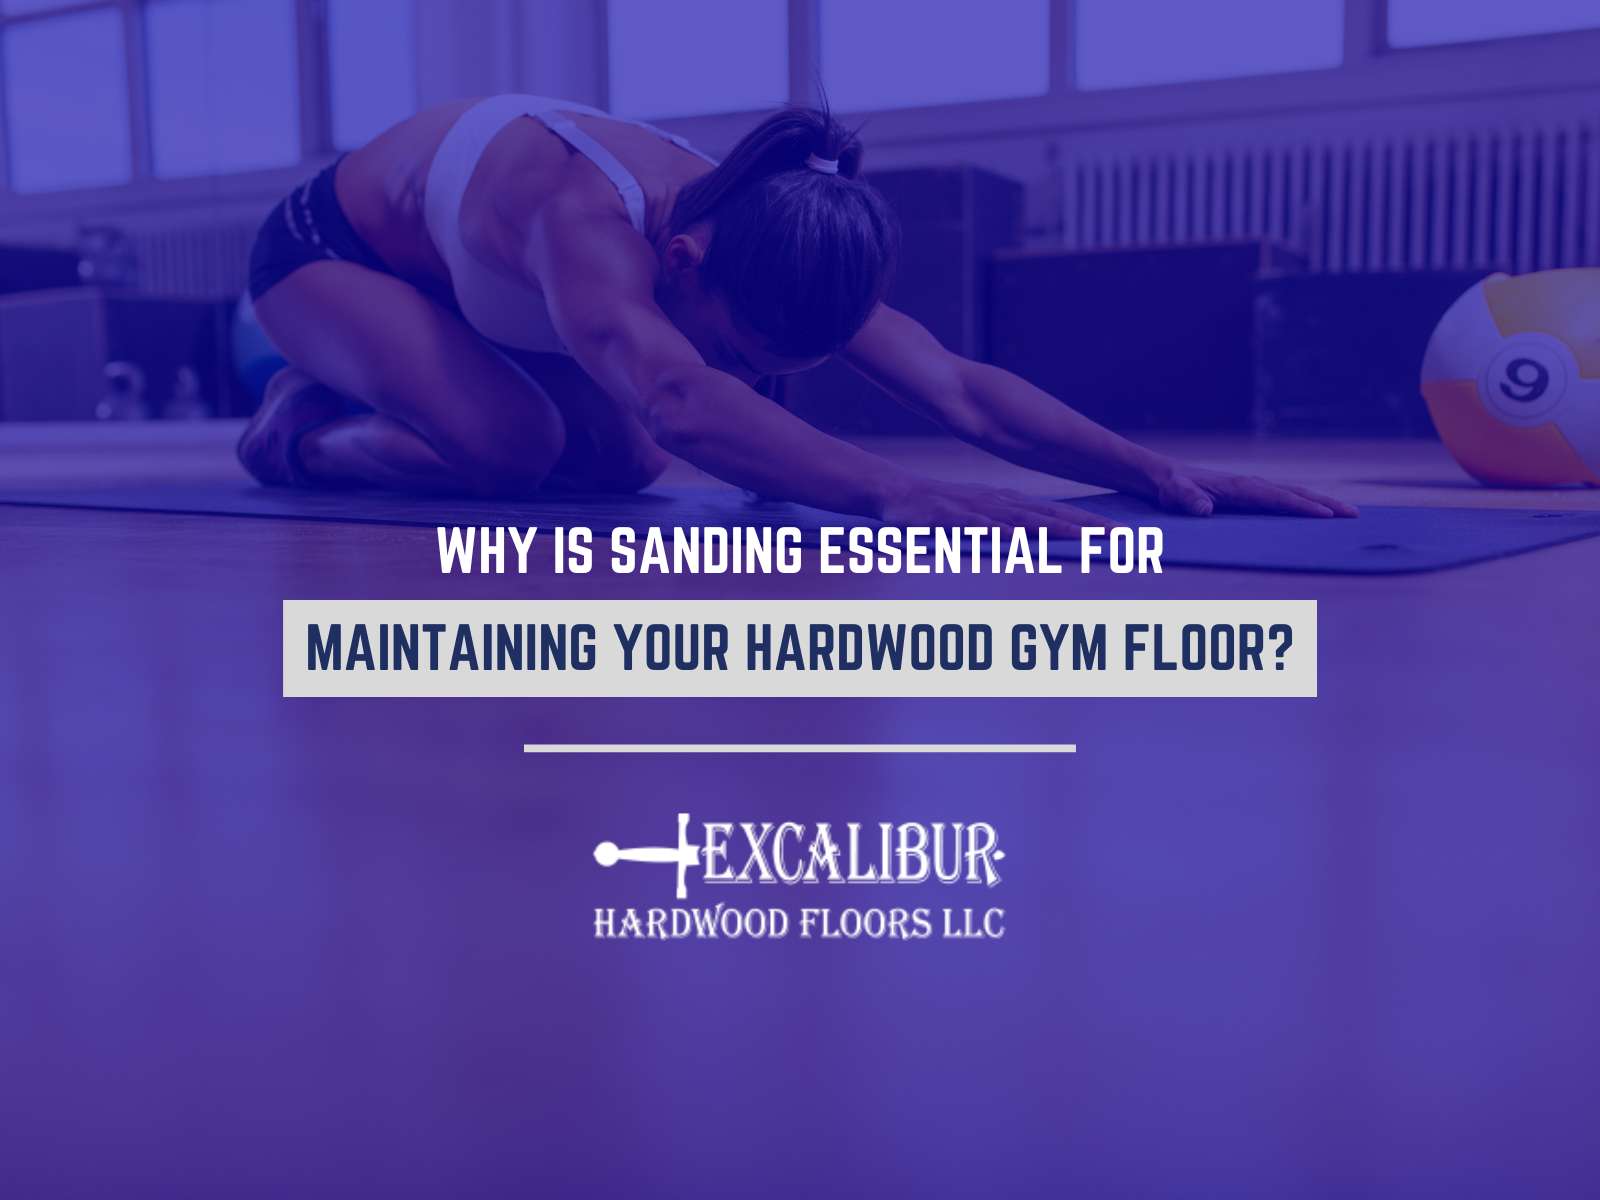 Why Is Sanding Essential For Maintaining Your Hardwood Gym Floor